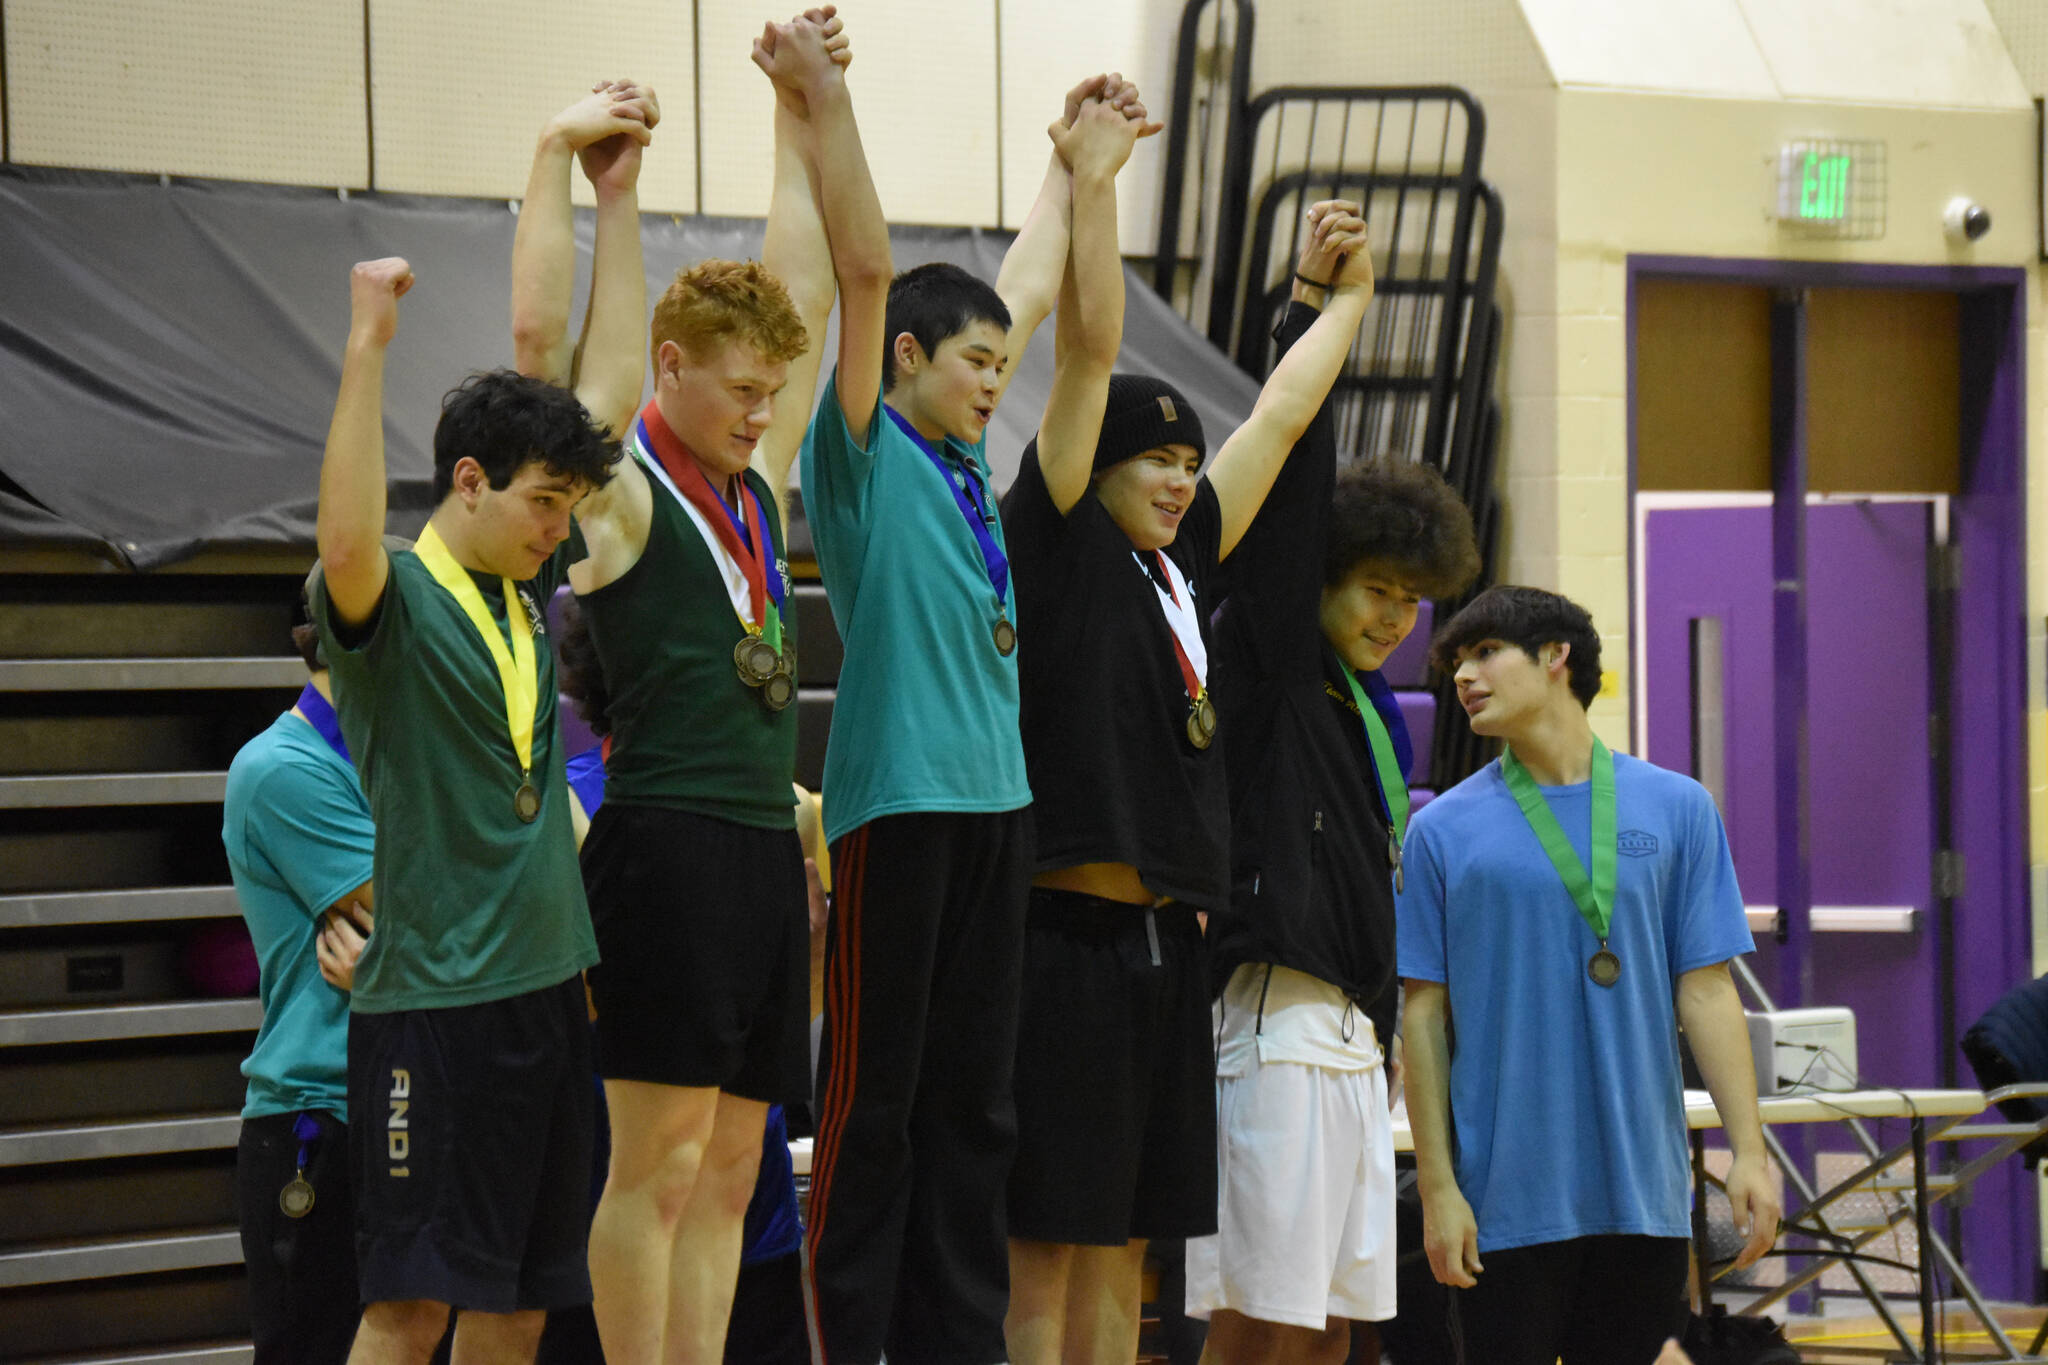 The top five finishers of the wrist carry, including Austin Butler with his gold medal, celebrate together during the Kahtnuht’ana Hey Chi’ula NYO Invitational on Saturday, Jan. 14, 2023, at Kenai Middle School in Kenai, Alaska. (Jake Dye/Peninsula Clarion)